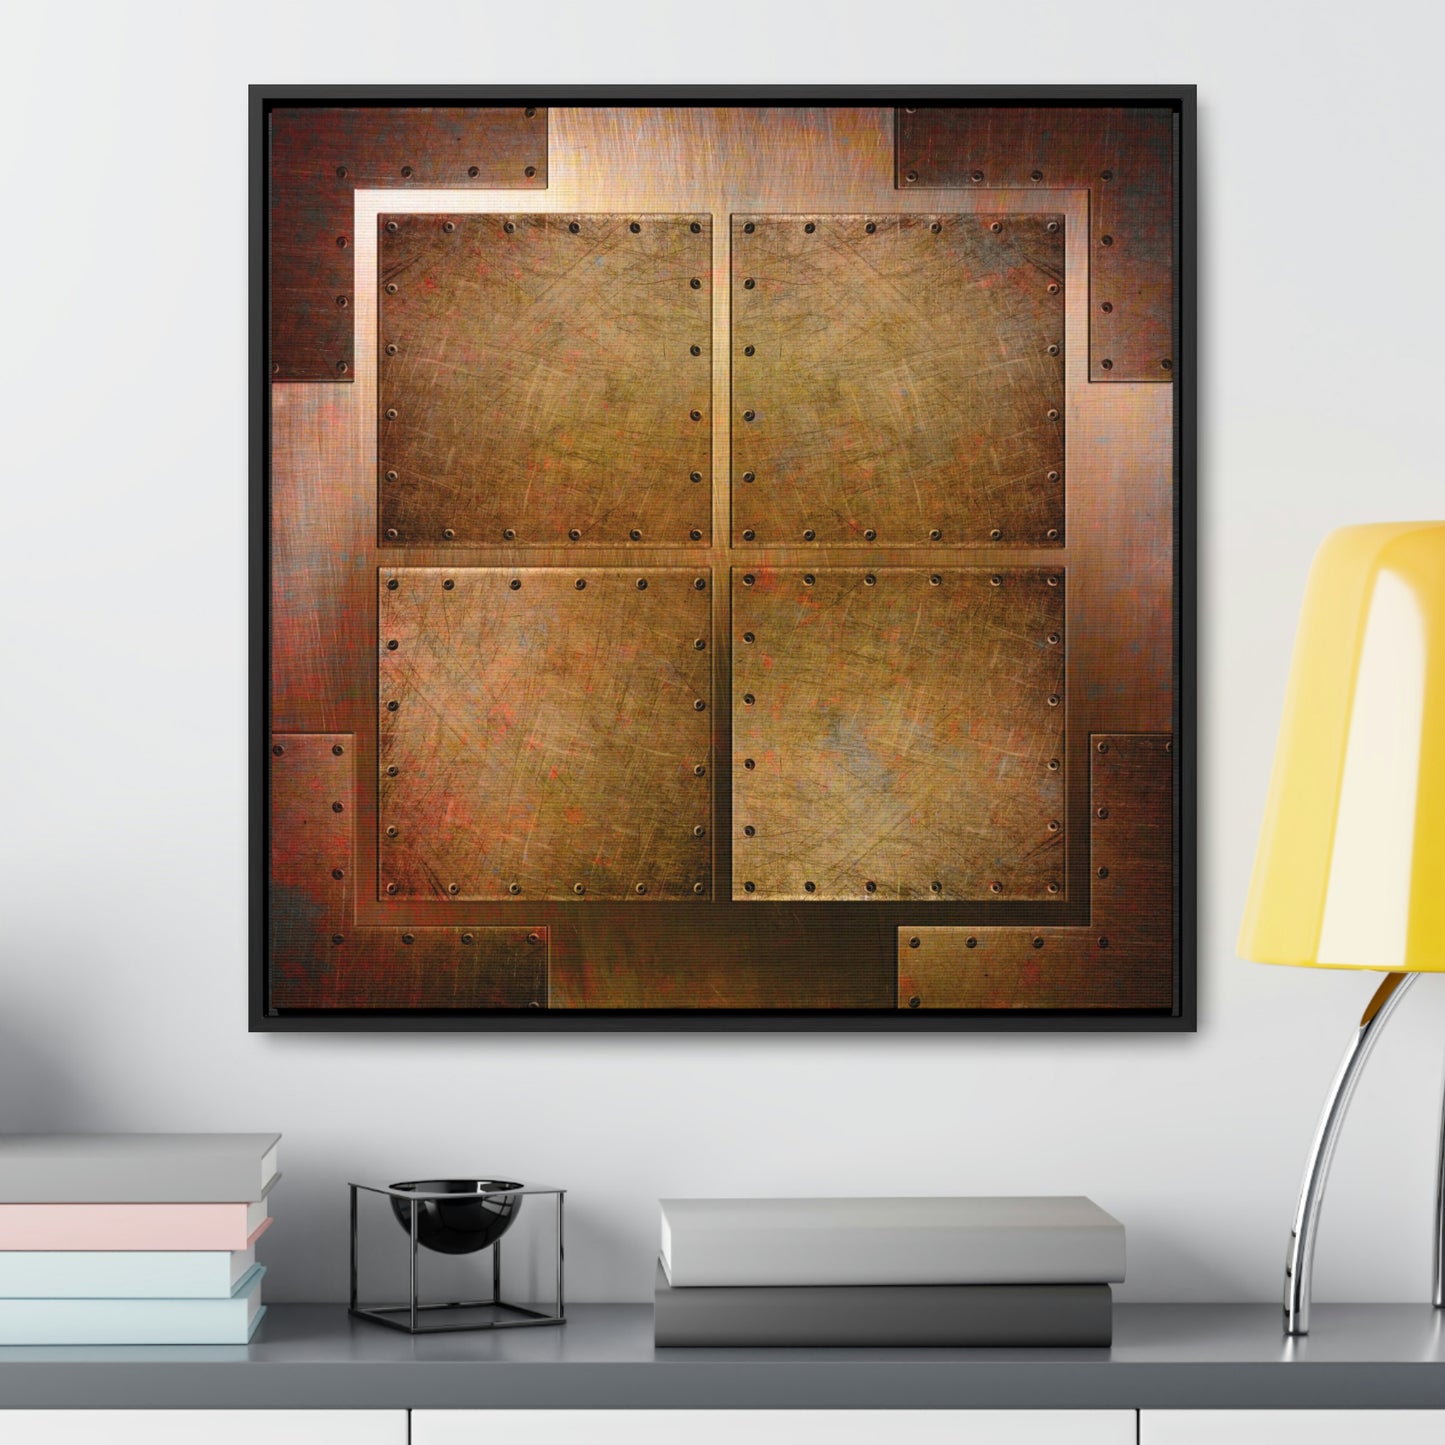 Steampunk Themed Framed Wall Art - Distressed, Riveted Copper Sheets Print on Canvas in a Floating Frame hung on white wall